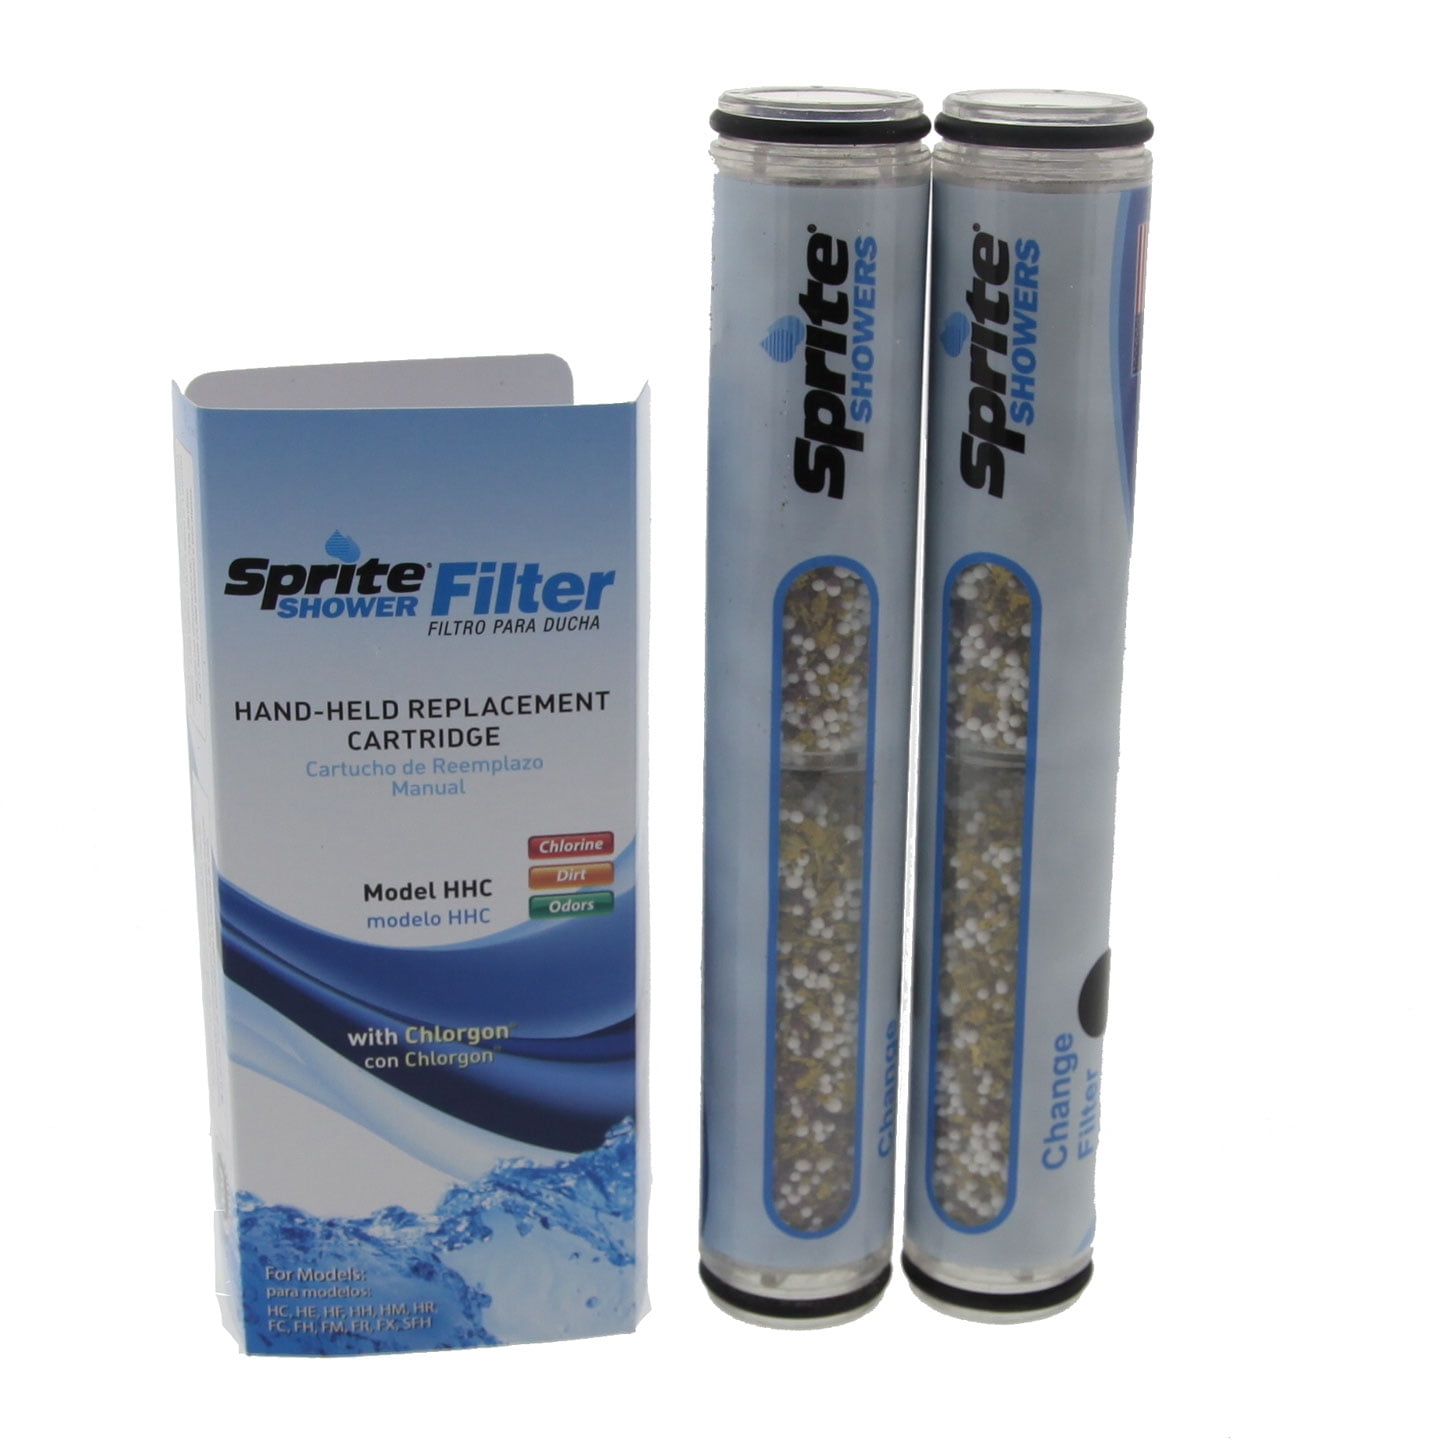 SPRITE HANDHELD HHC-2 REPLACEMENT SHOWER FILTER FREE SHIP * 